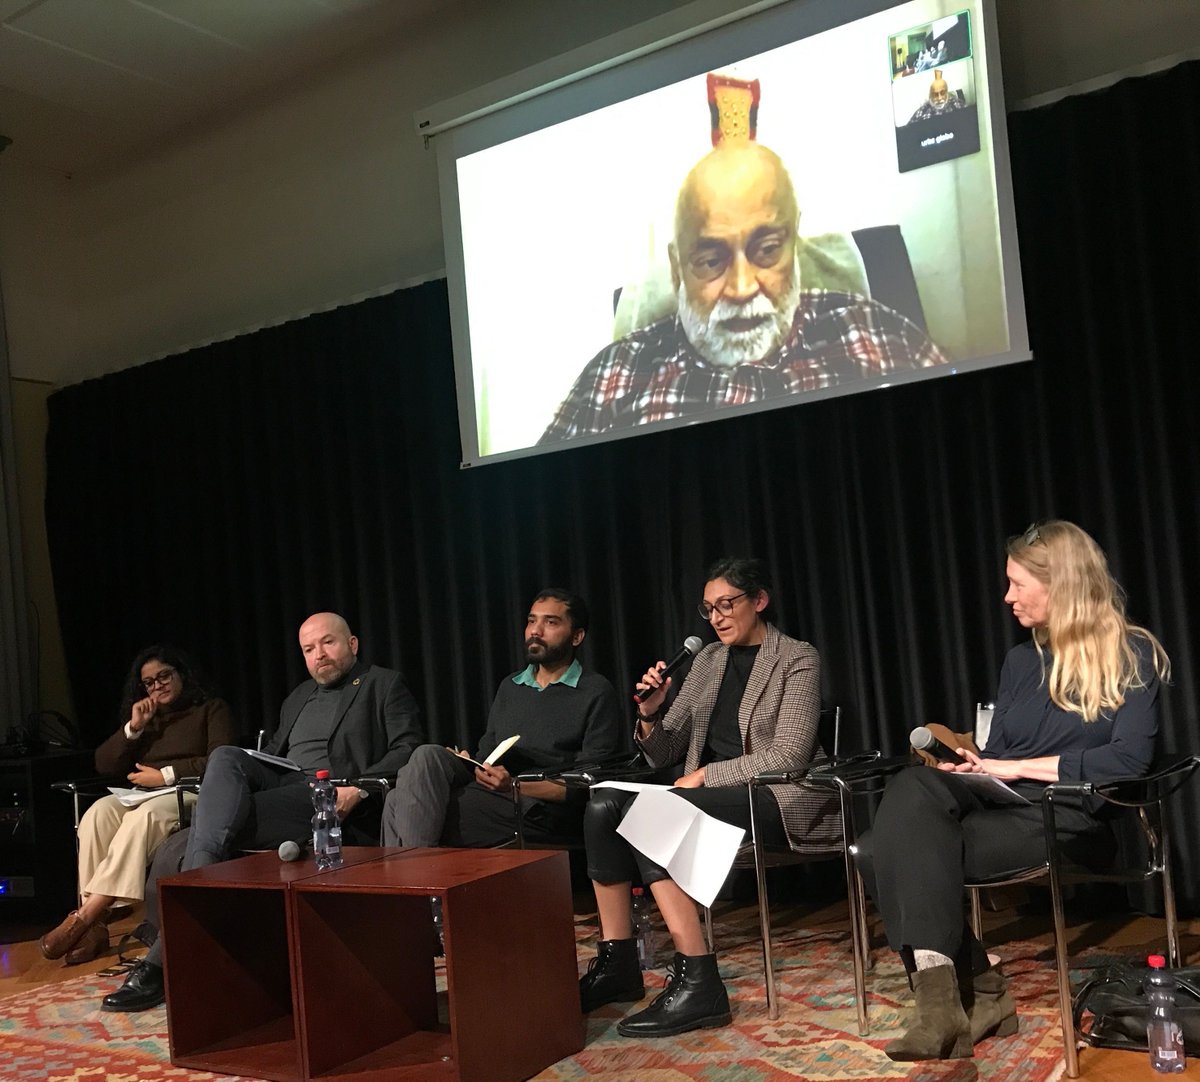 Lively discussion on #Indian #democracy with Prof. Arjun Appadurai, @amnesty Lisa Majumdar, @WalderNicolas, @Anthro_UniBern Sharib Aqleem Ali and audience in Bern, 'creating awareness of challenges to fundamental rights in Indian Constitution' (co-host Inst.of Federalism @unifri)